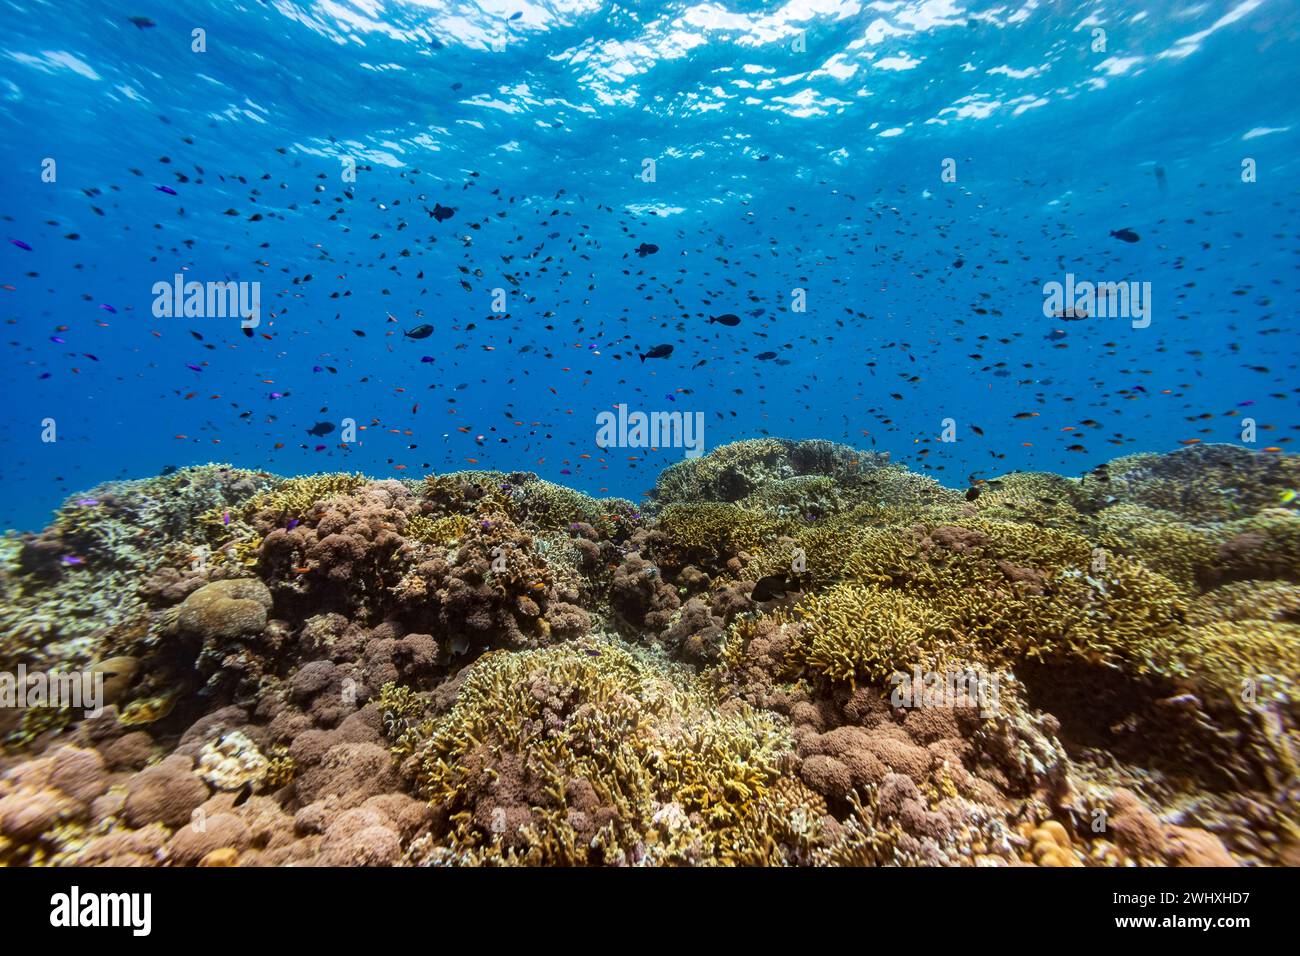 Tropical reef Coral landscape with many colorful schools of fish Stock Photo